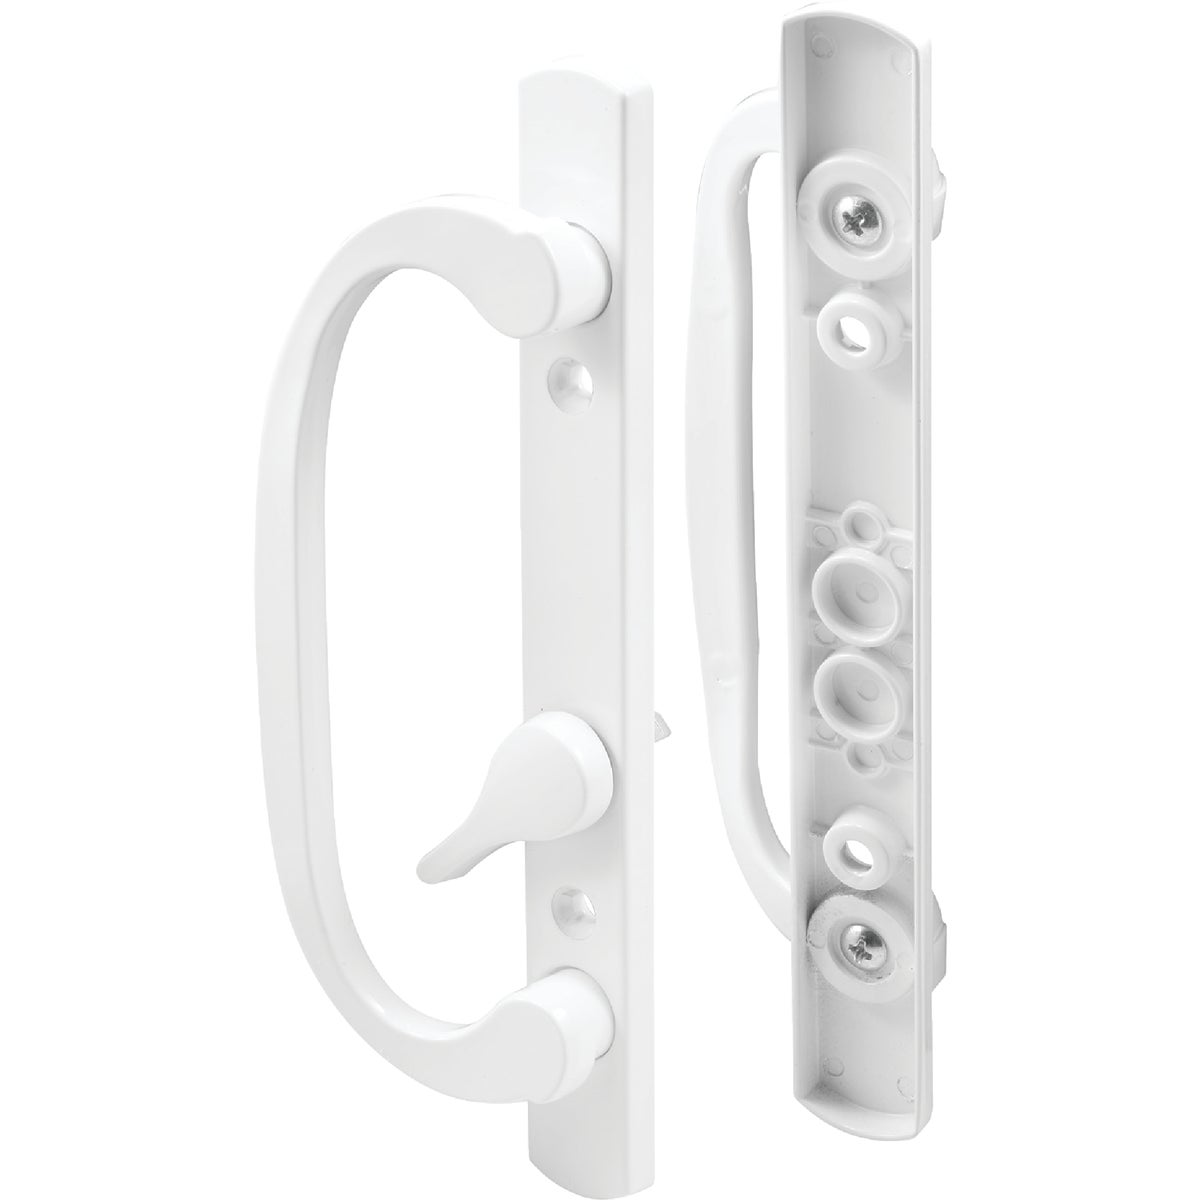 Prime-Line Mortise Style Sliding Door Handle Set With Offset Thumbturn